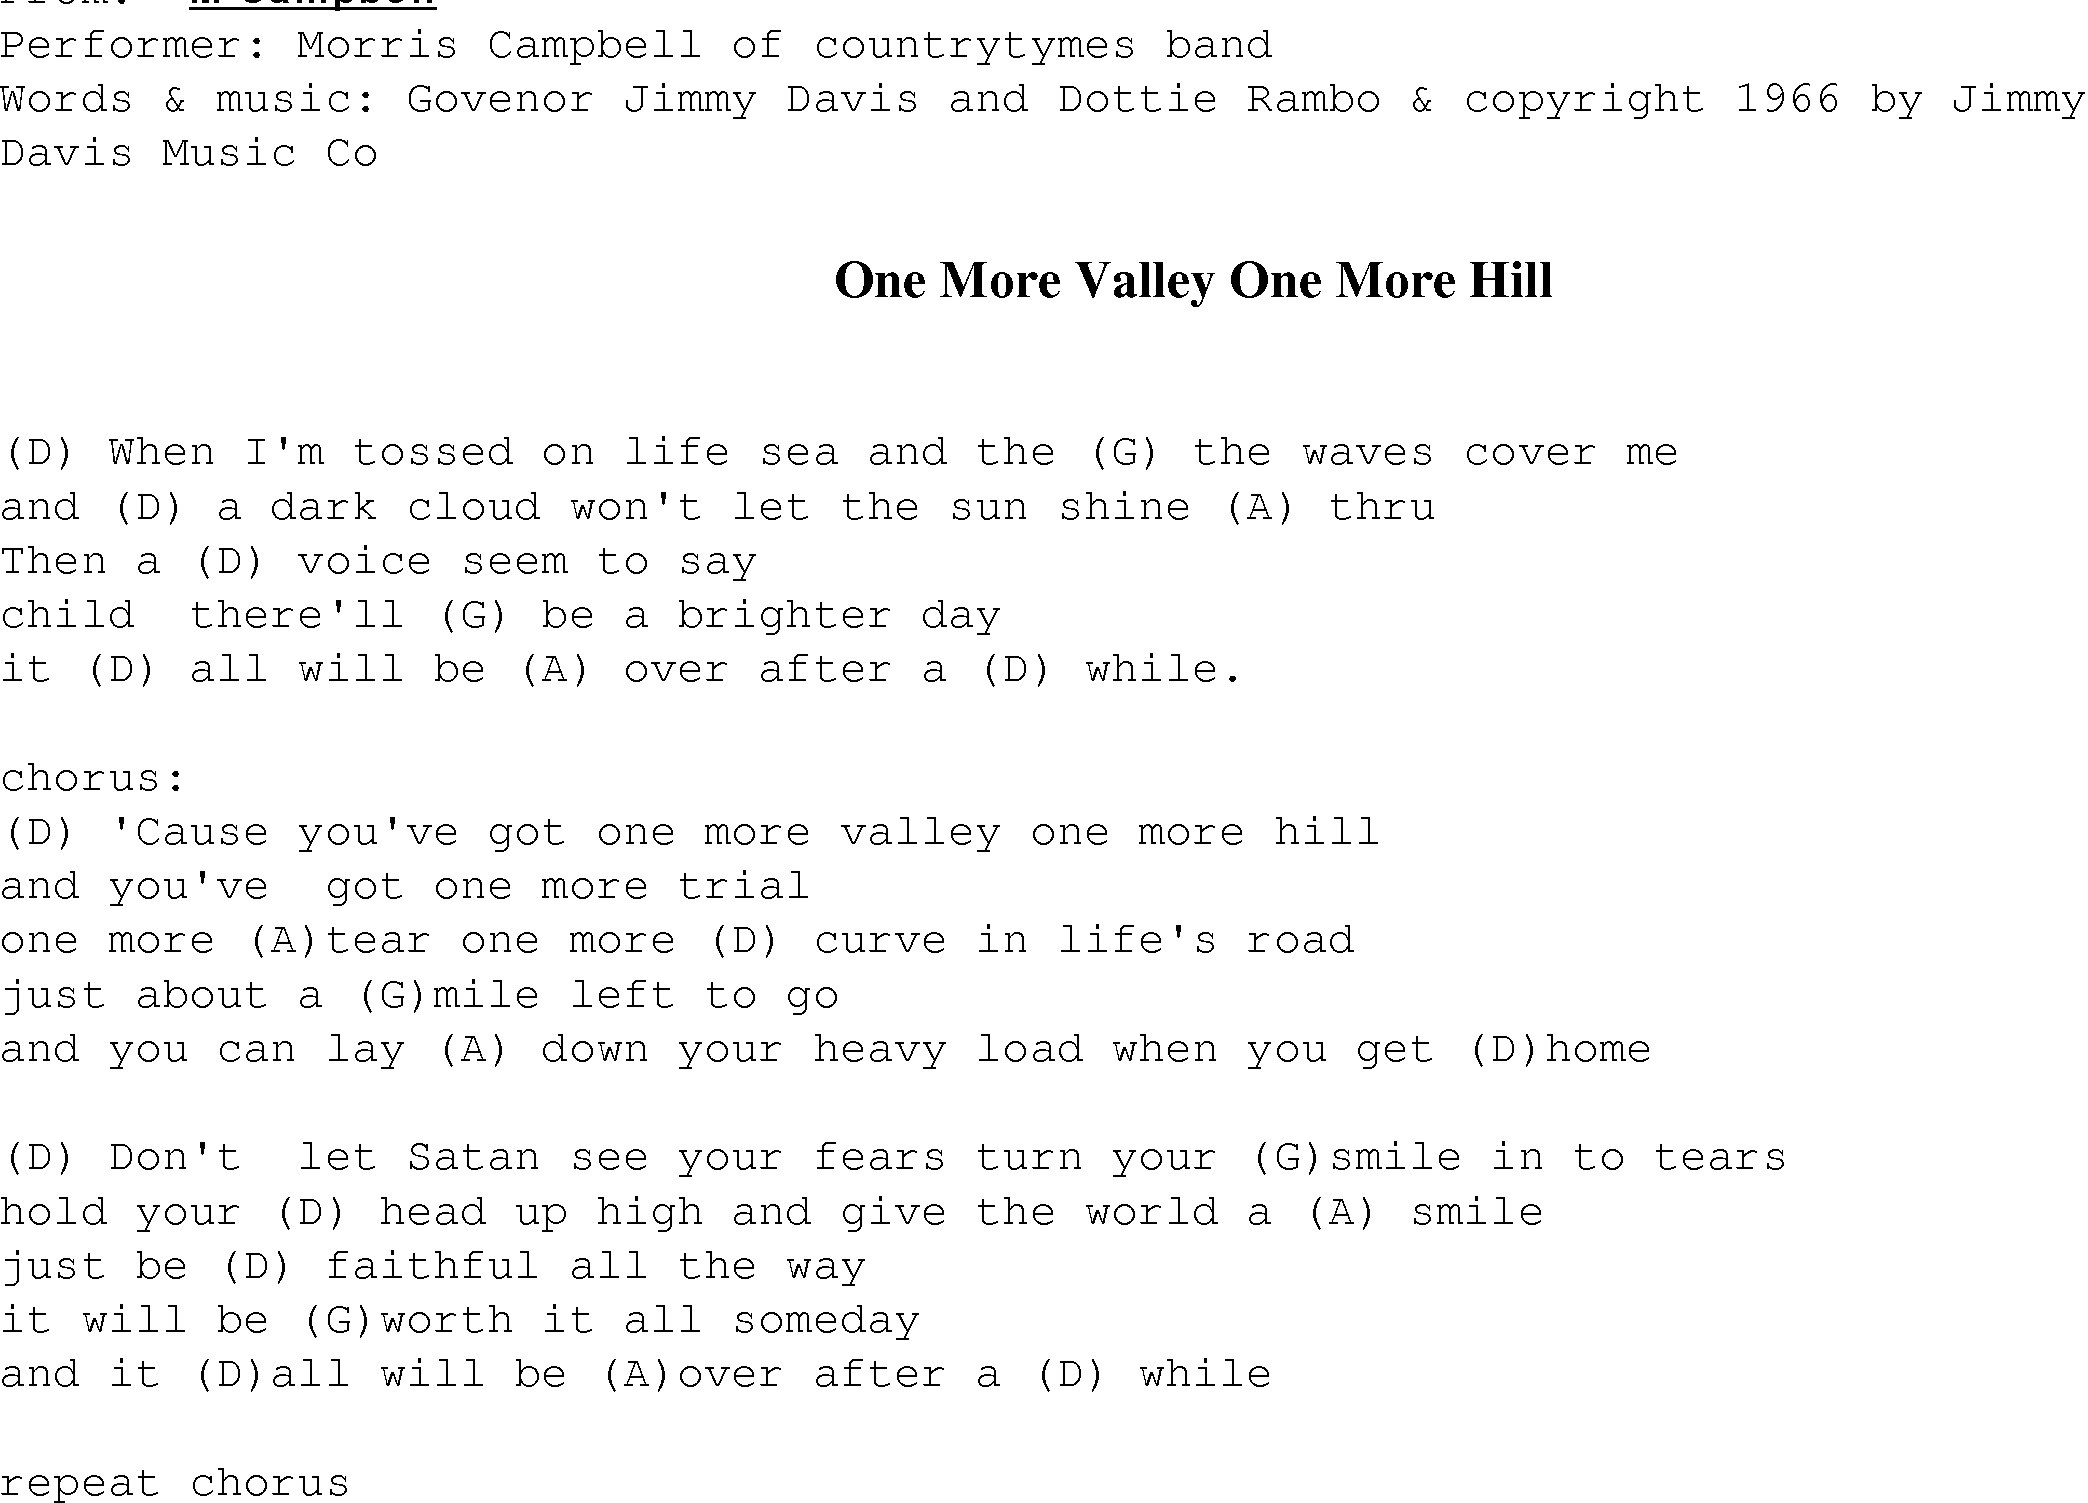 Gospel Song: one_more_valley_one_more_hill, lyrics and chords.